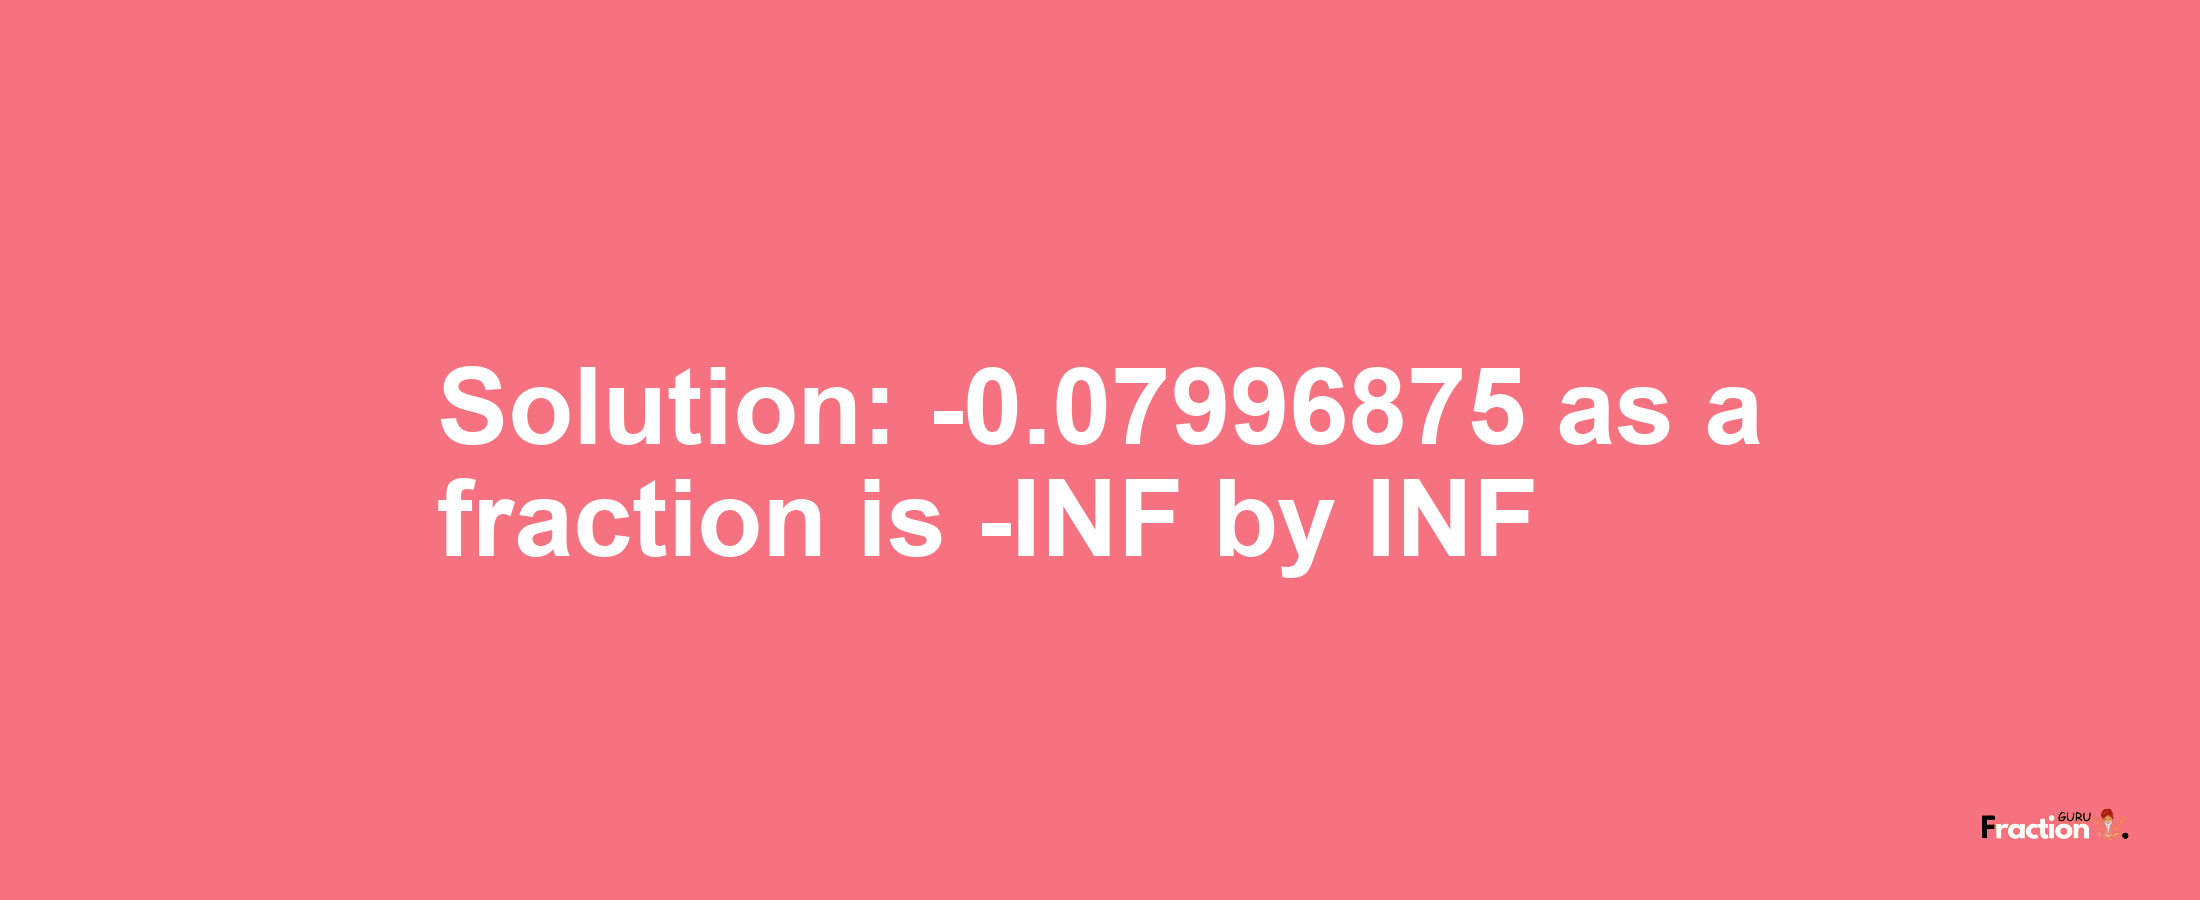 Solution:-0.07996875 as a fraction is -INF/INF